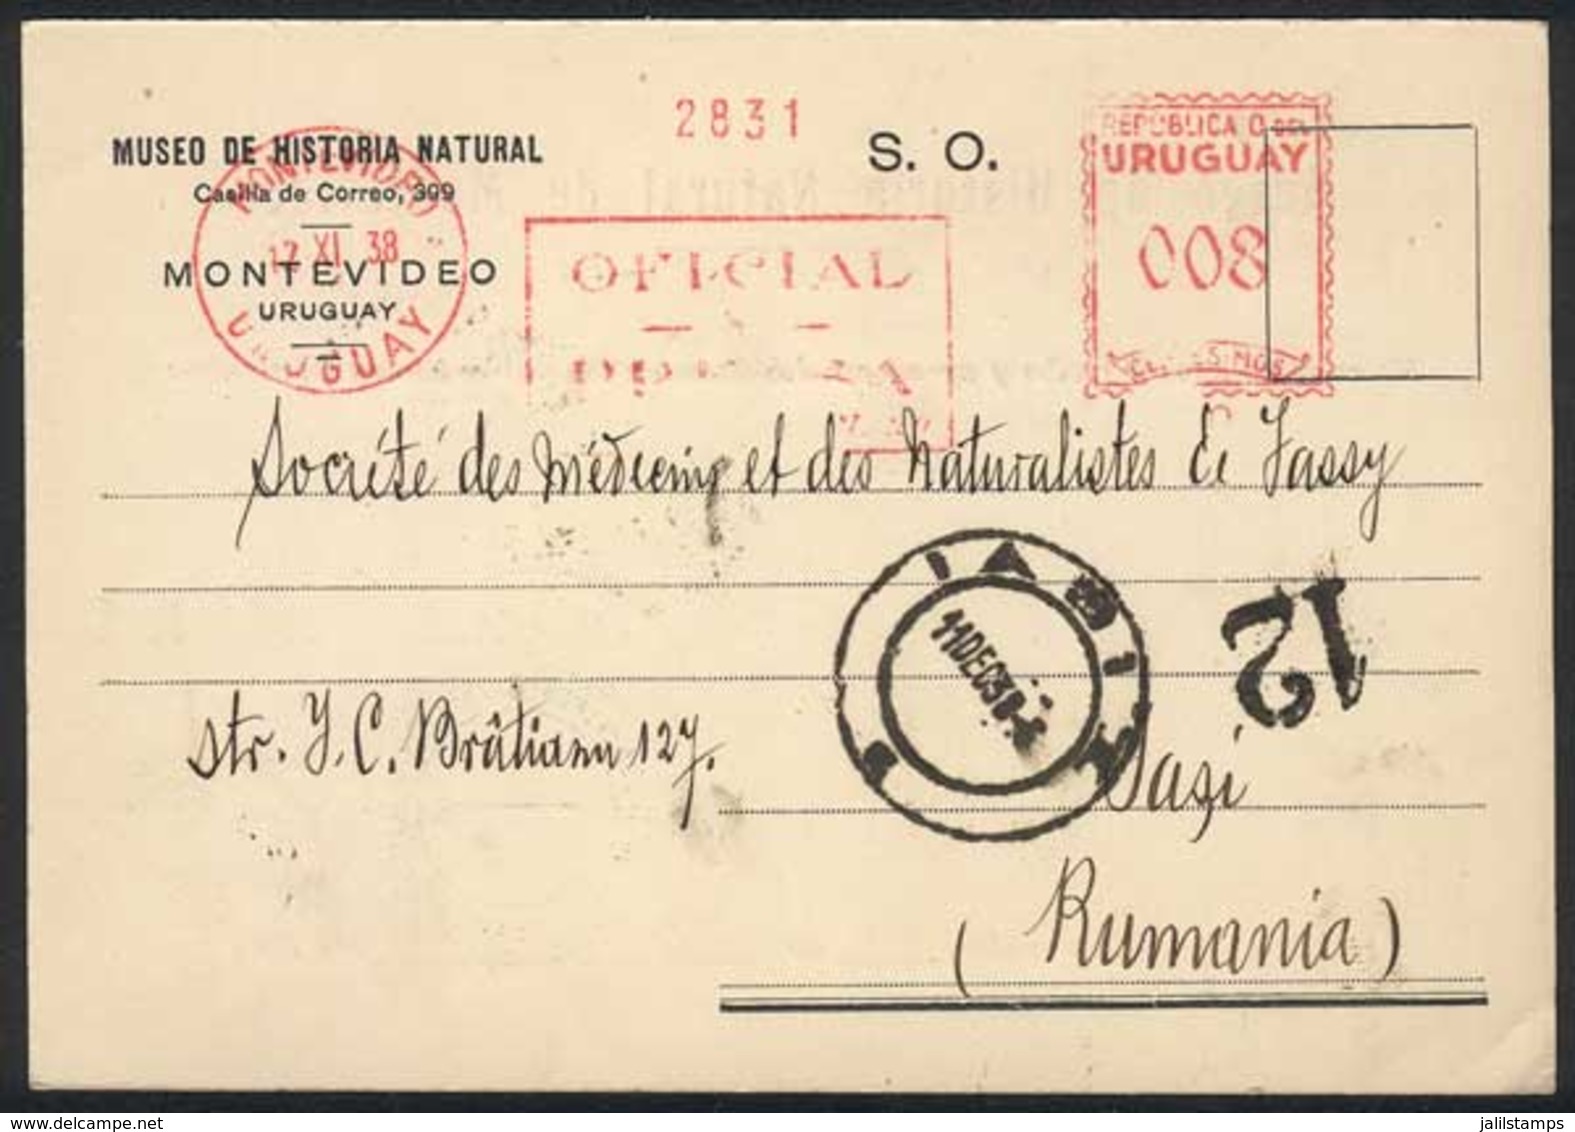 URUGUAY: Card Of The Museum Of Natural History Sent To ROMANIA On 12/NO/1938, With Meter Postage Of 8c. With Inscription - Uruguay